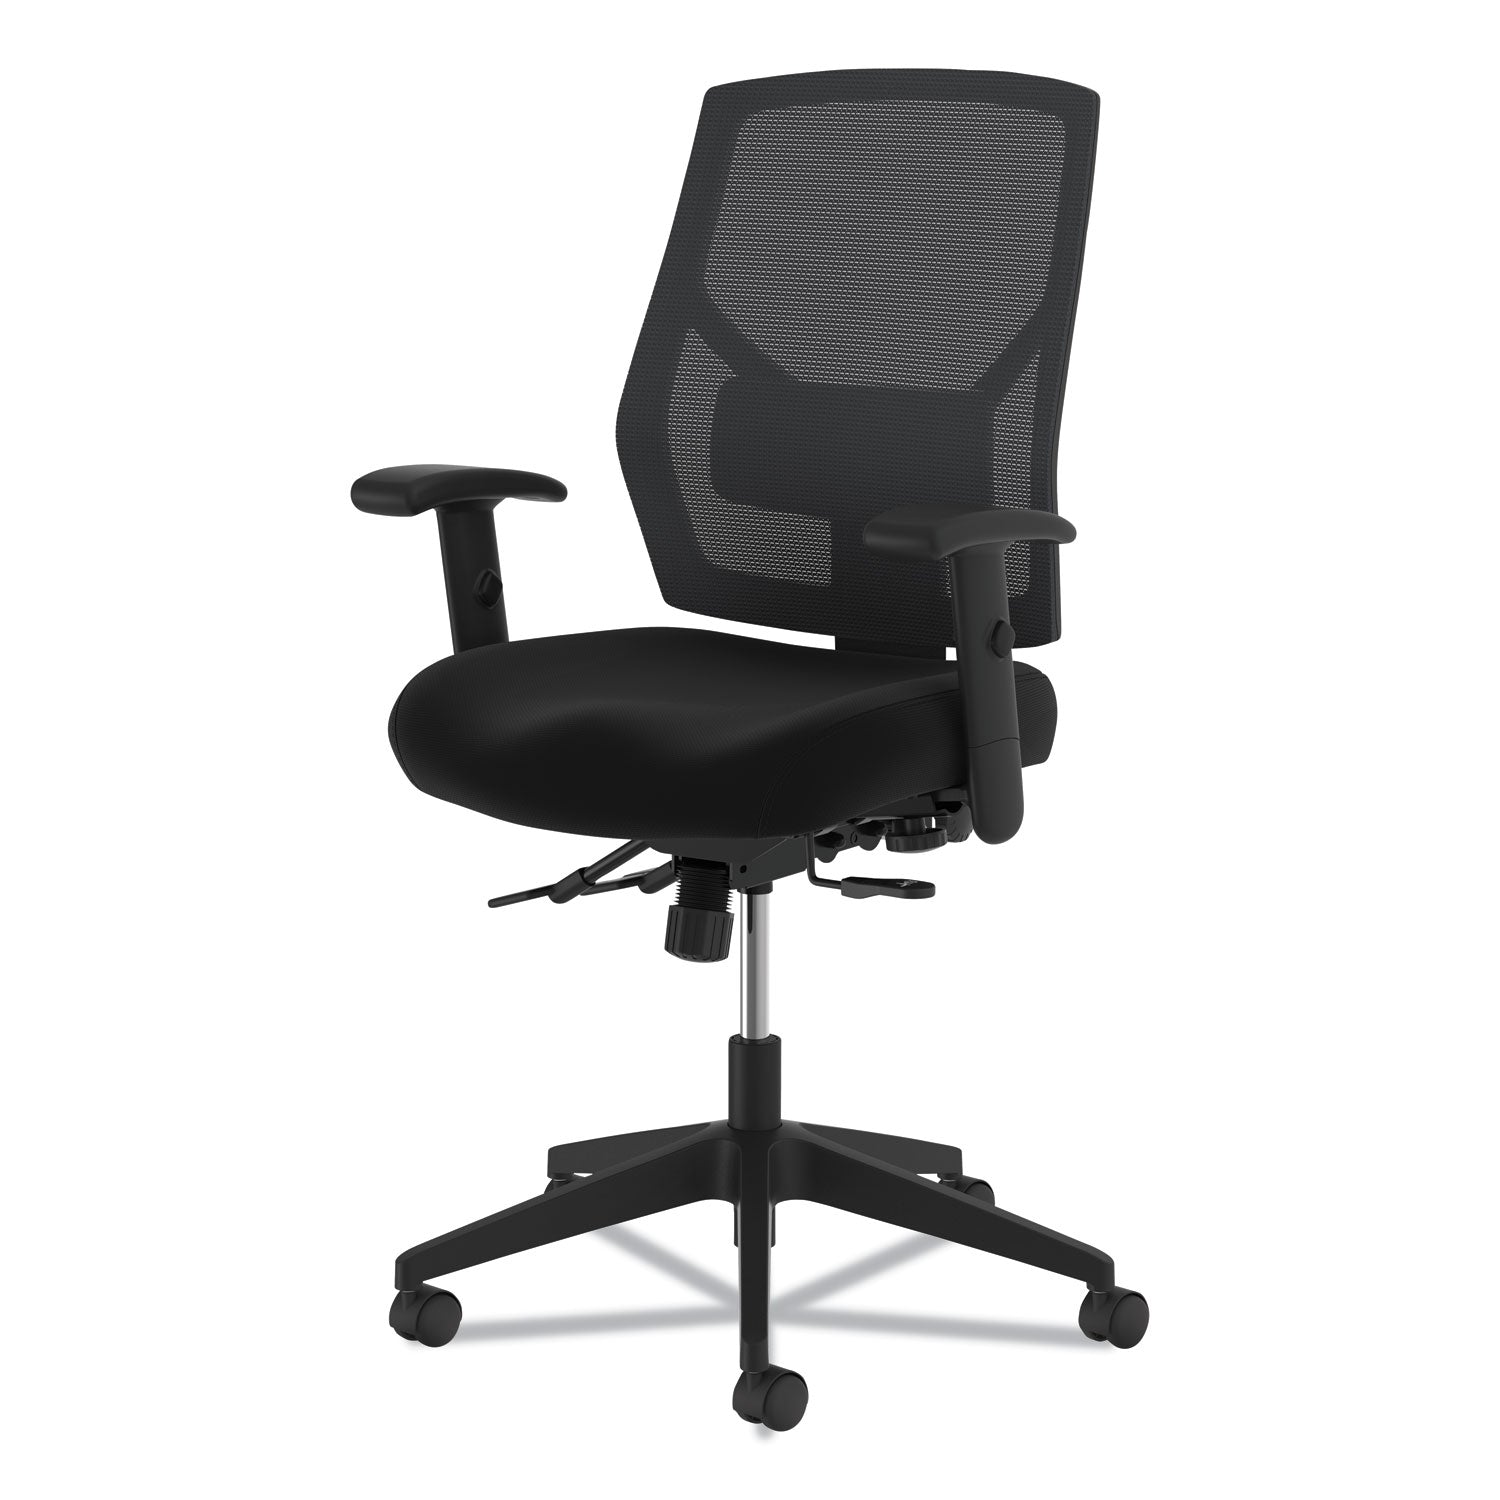 vl582-high-back-task-chair-supports-up-to-250-lb-19-to-22-seat-height-black_bsxvl582es10t - 3